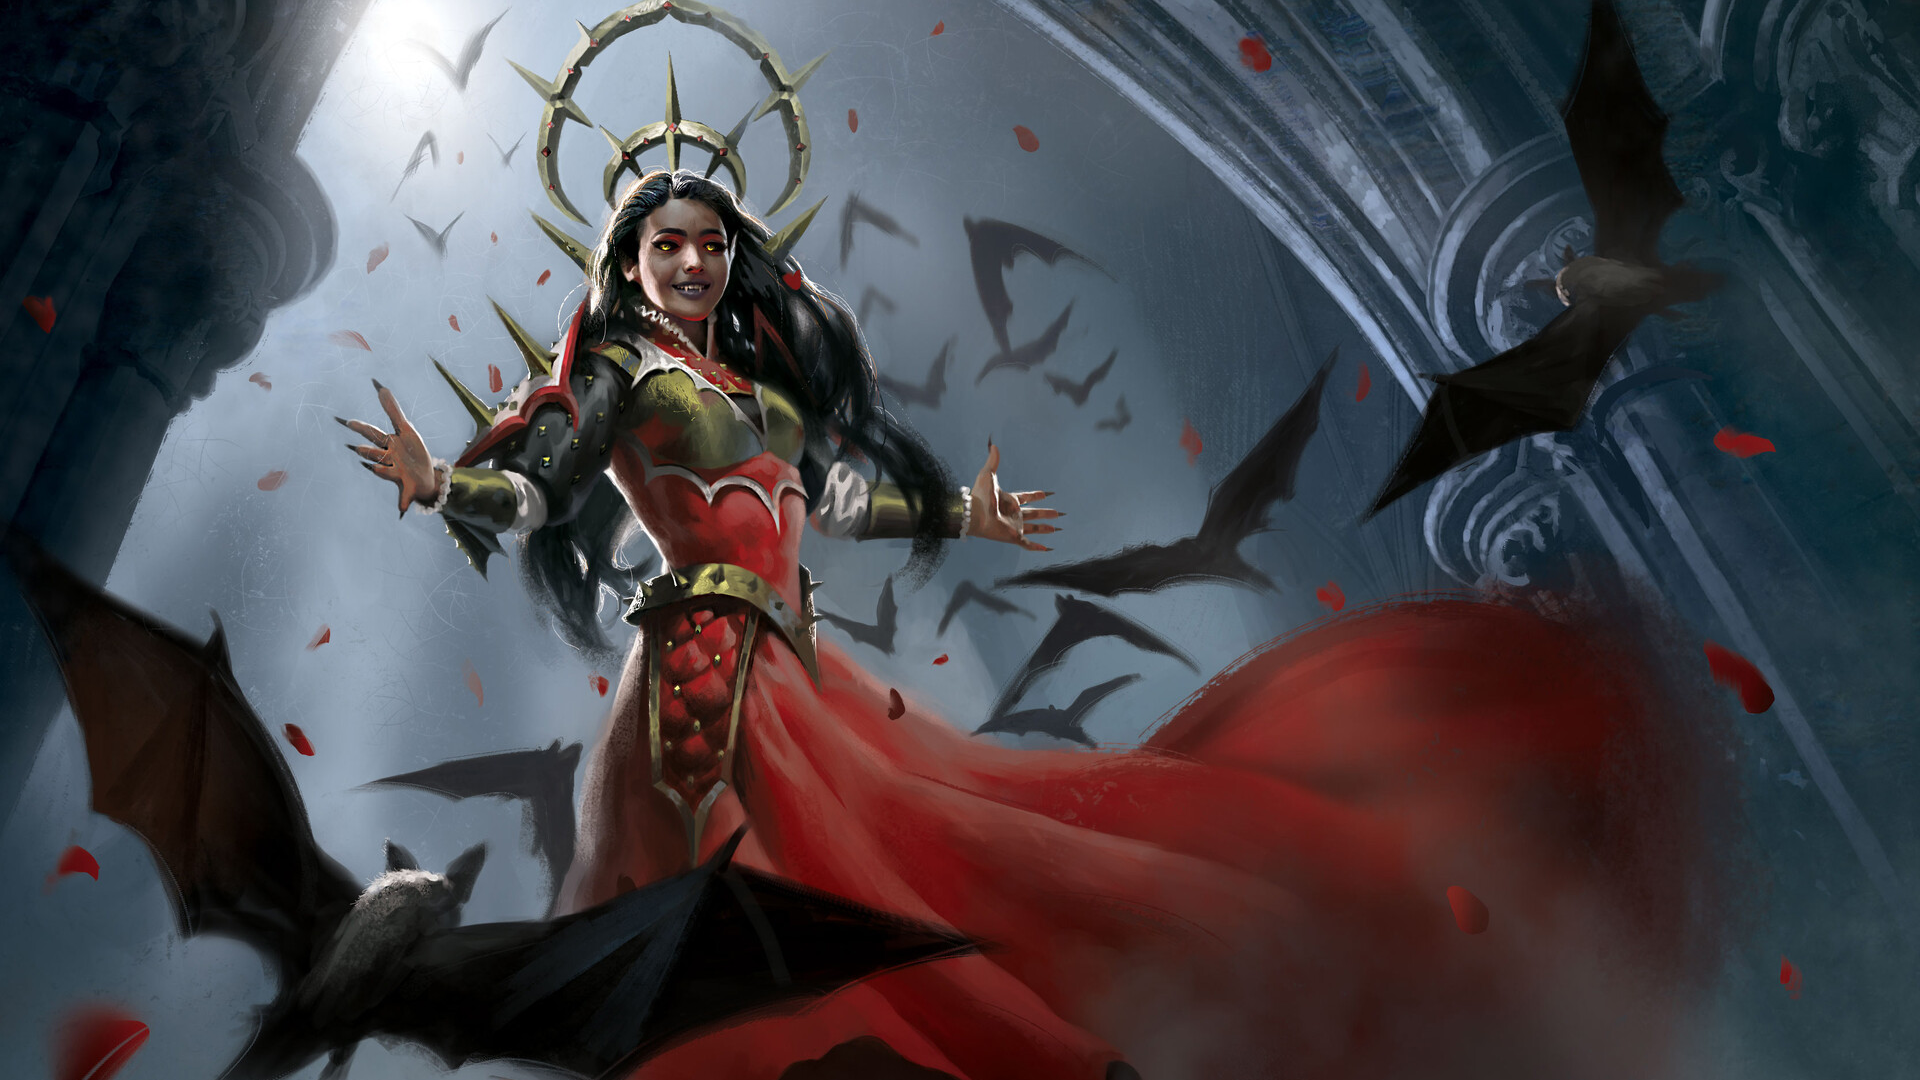 Card art for Magic: The Gathering's Welcoming Vampire from Innistrad: Crimson Vow. A woman vampire in a flowing red dress hold out her arms to a swarm of bats as she hovers in the night sky.